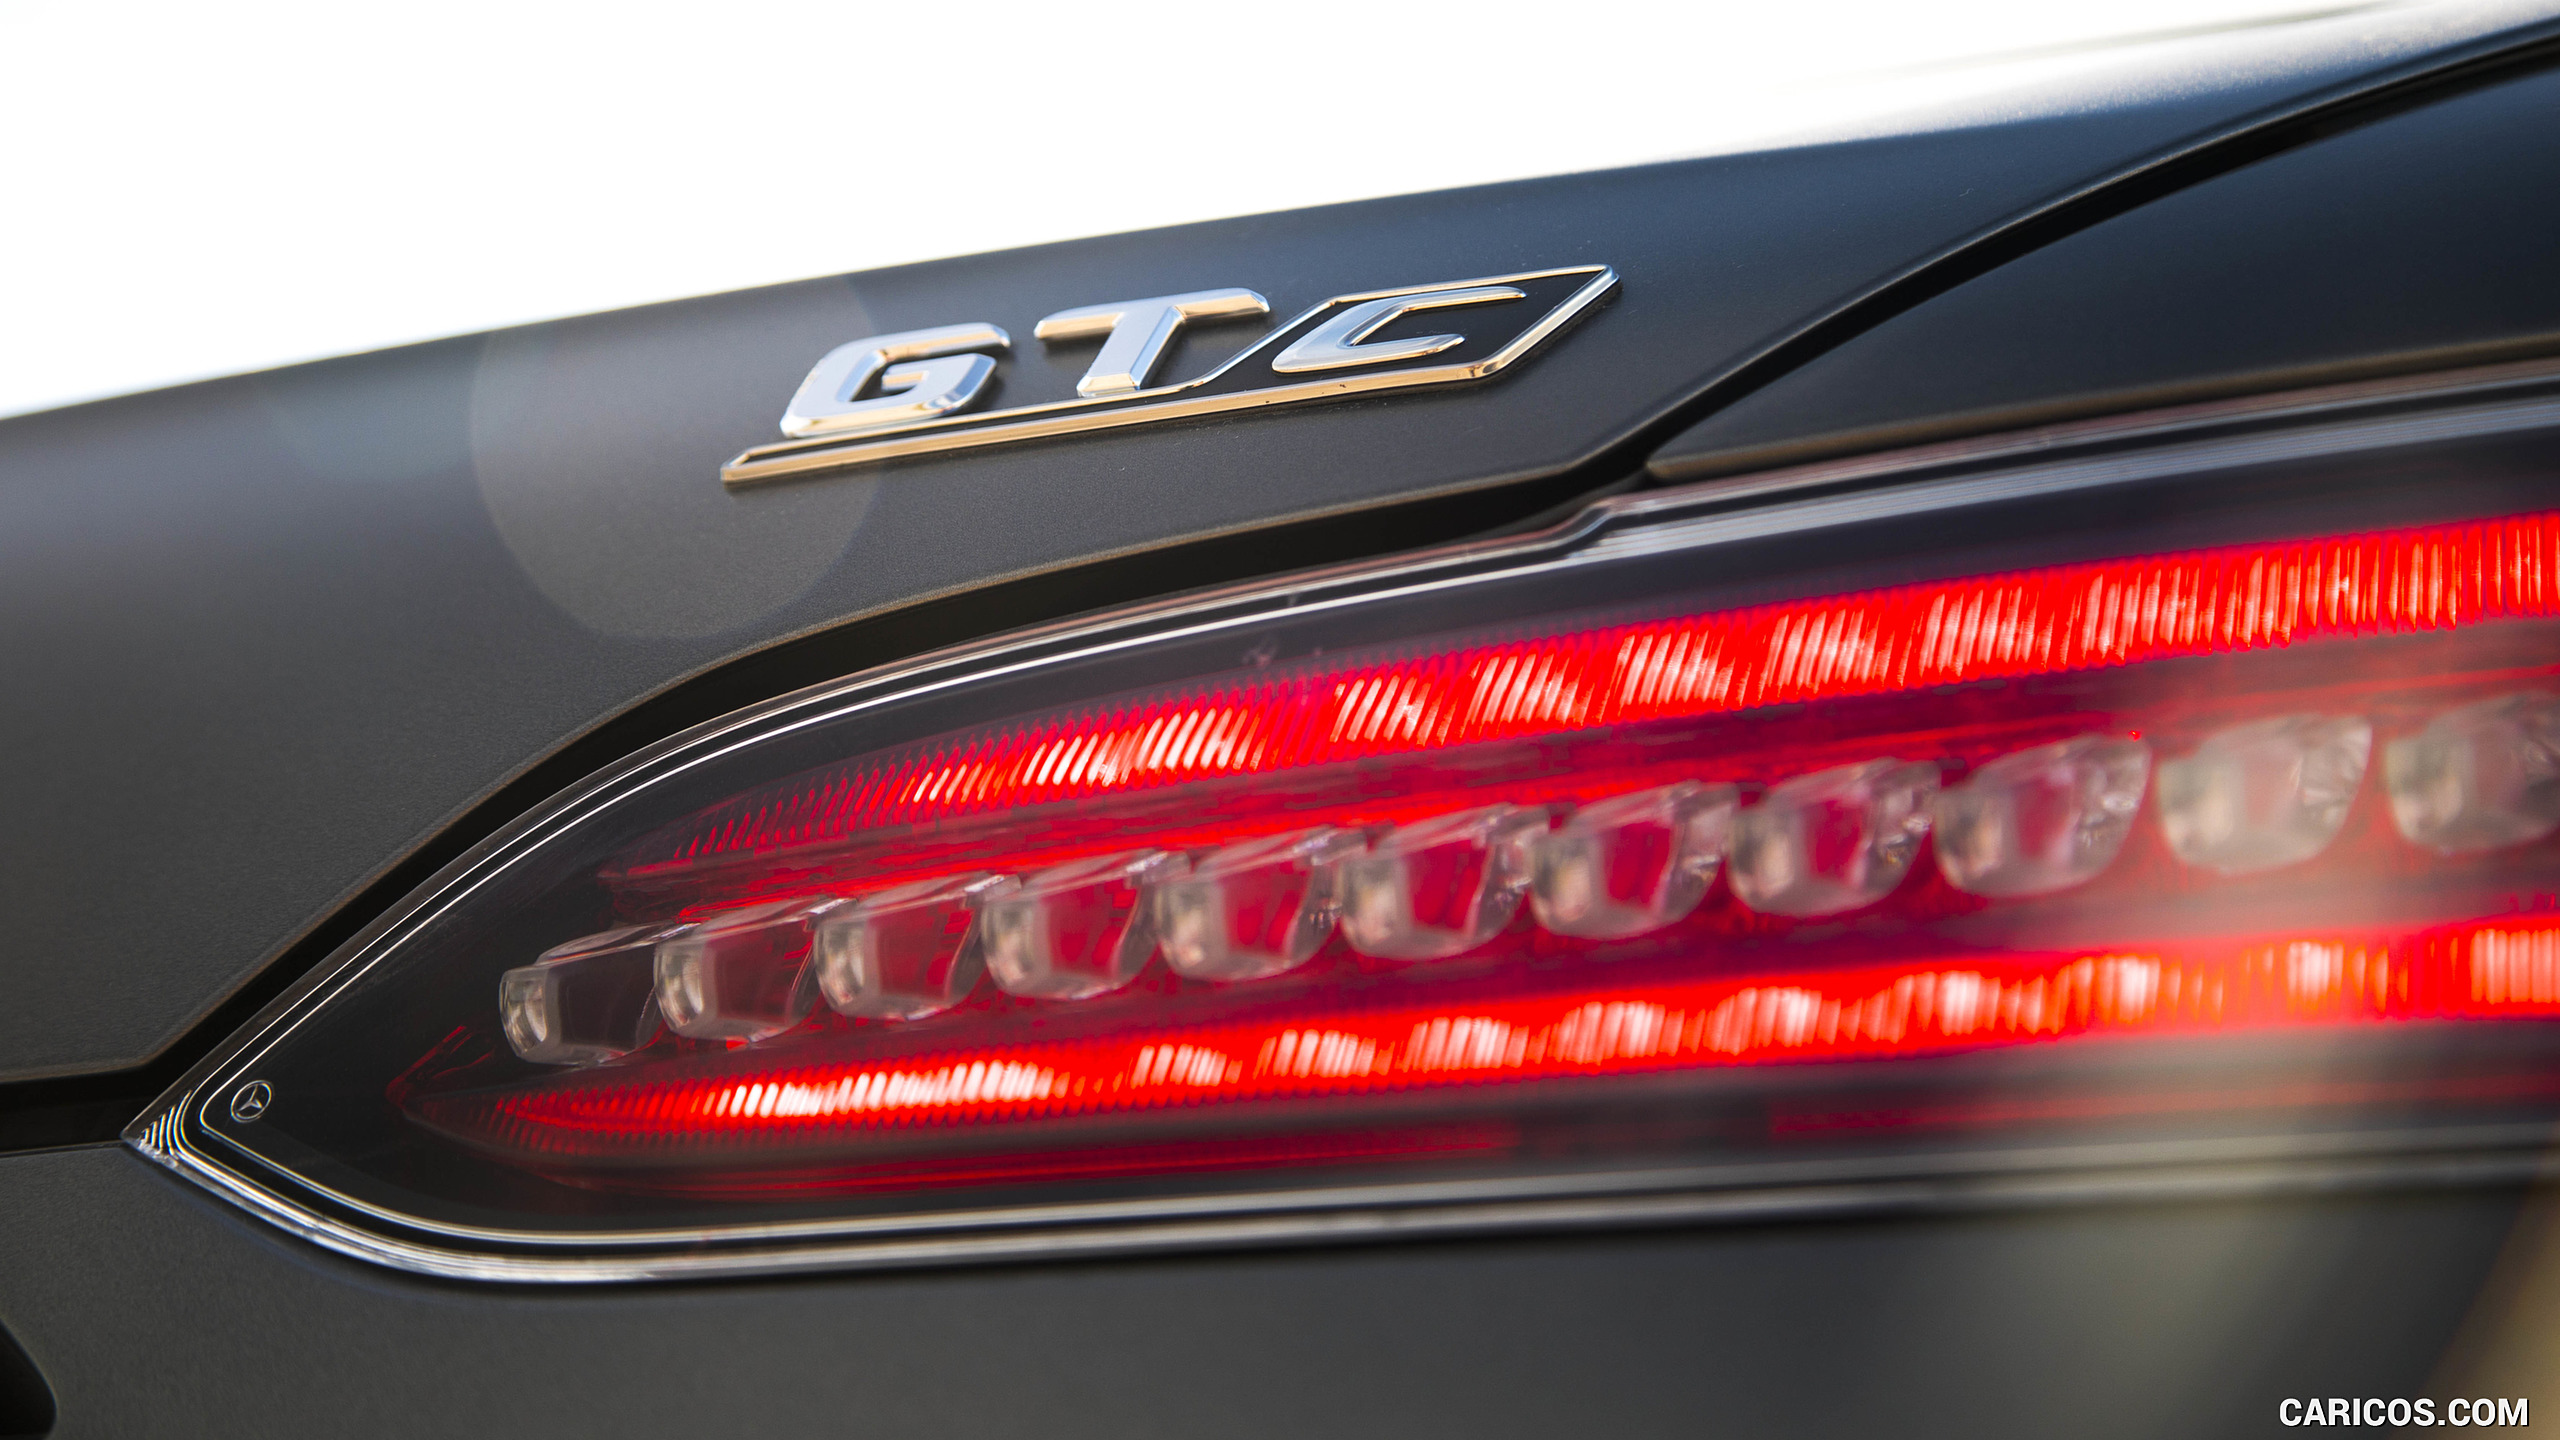 2018 Mercedes-AMG GT C Roadster - Tail Light, #71 of 350